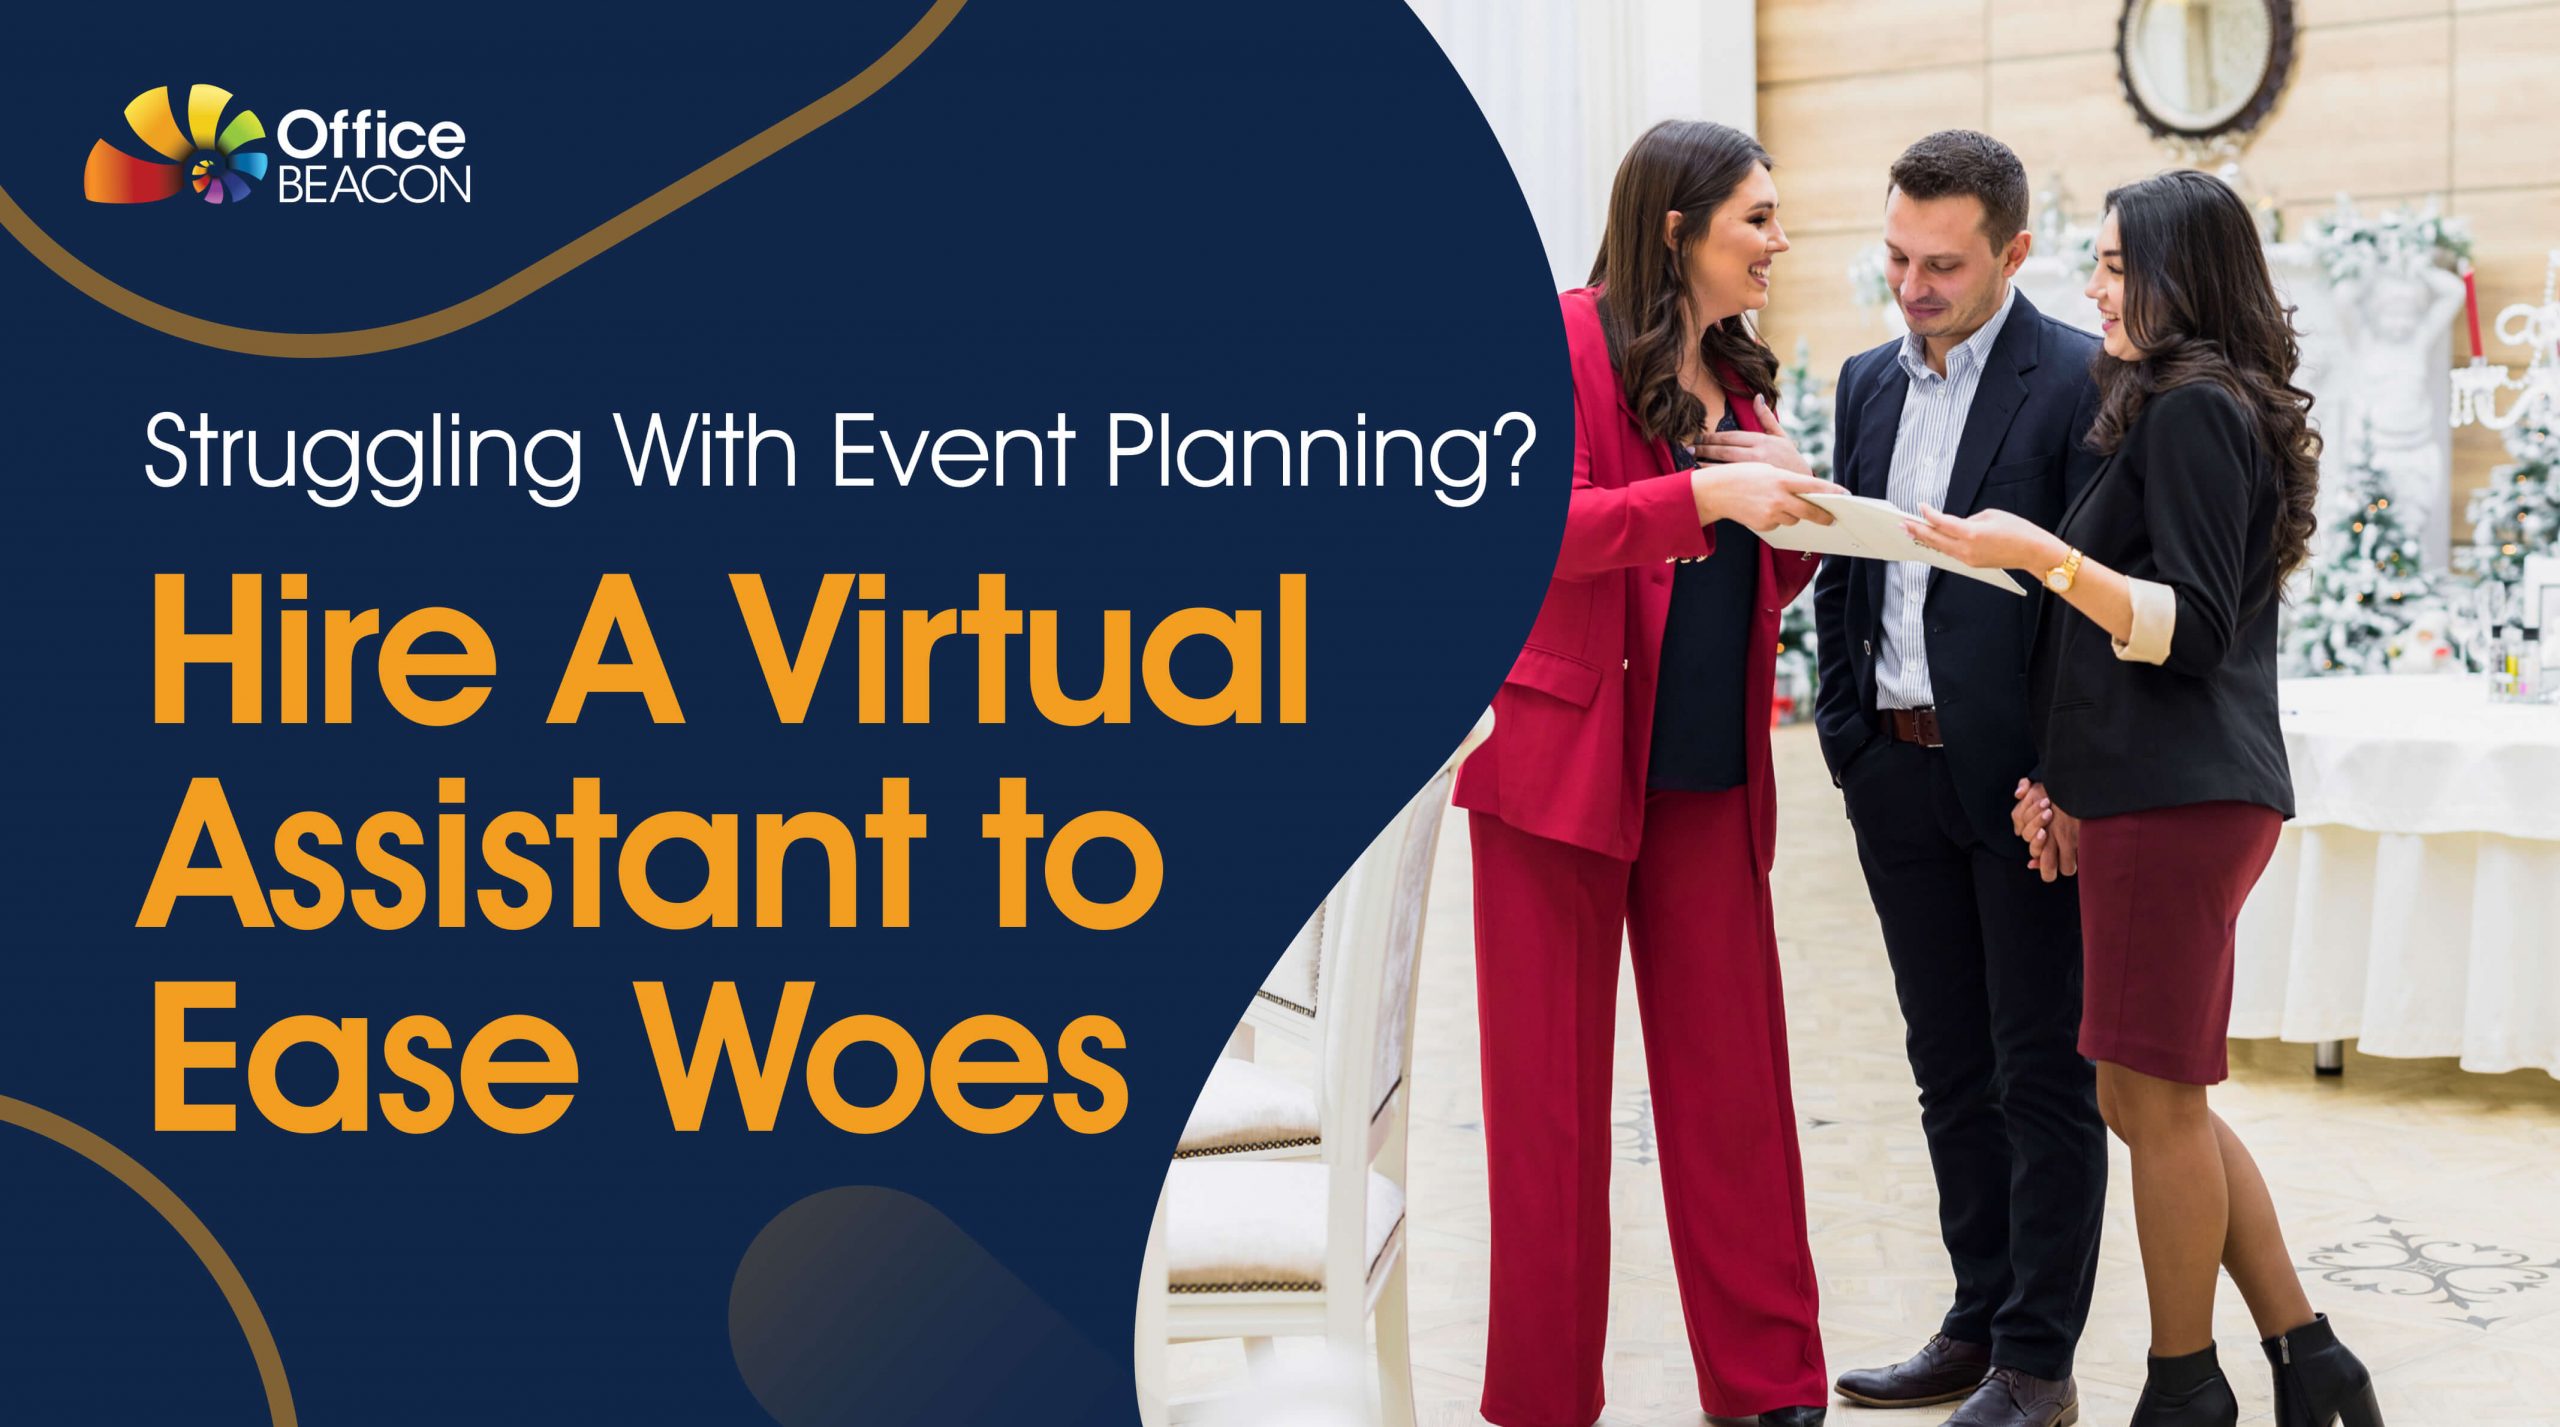 Struggling With Event Planning? Hire A Virtual Assistant to Ease Woes